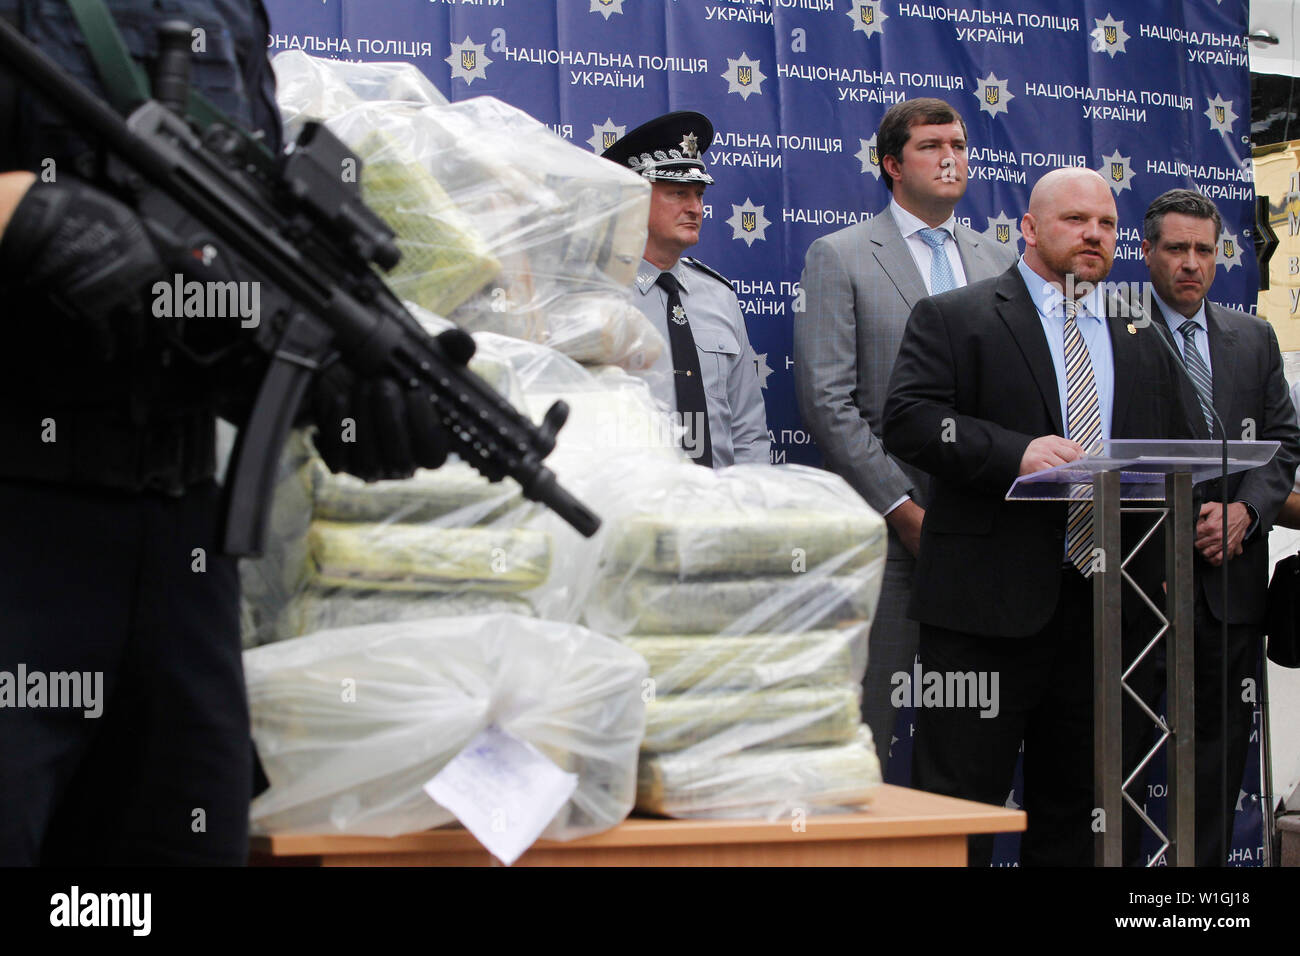 Attache of the Warsaw Office of United States Department of the Drug Enforcement Administration (DEA) Jason Schumacher (2-R) and Deputy Chief Regional Officer for the U.S. Department of the Drug Enforcement Administration (DEA) Kevin Daniels (R)  speaks while standing next to bags of cocaine, which were seized during a special police operation, at a press conference of the National Police and the Anti-Narcotic Police Department and the U.S. Department of the Drug Enforcement Administration (DEA) in the Ministry of Internal Affairs in Kiev.Ukrainian police in cooperation with the U.S. DEA revea Stock Photo